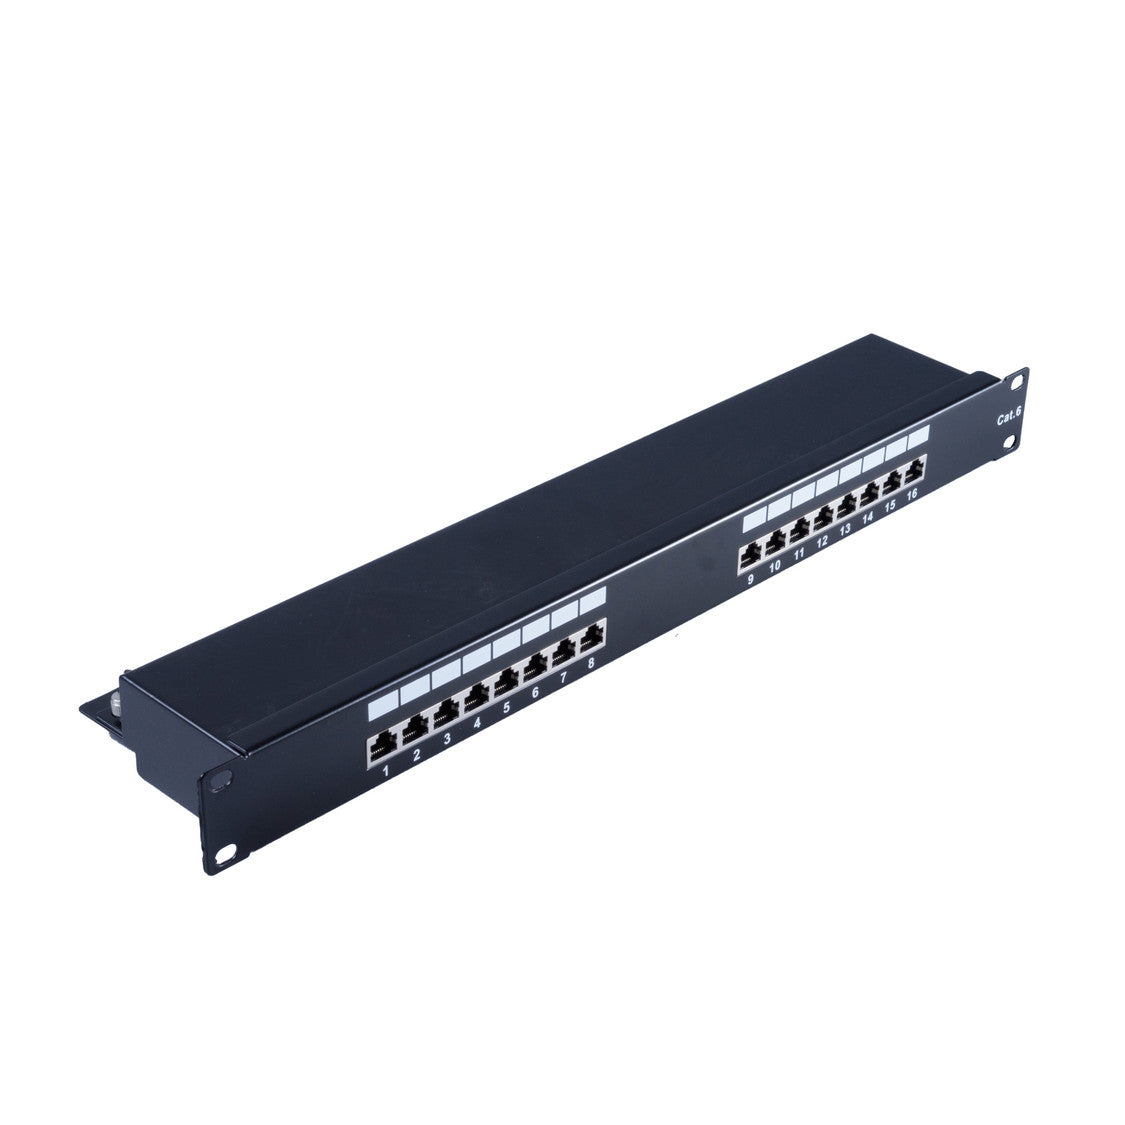 cat 6 19" 1HE-Patchpanel